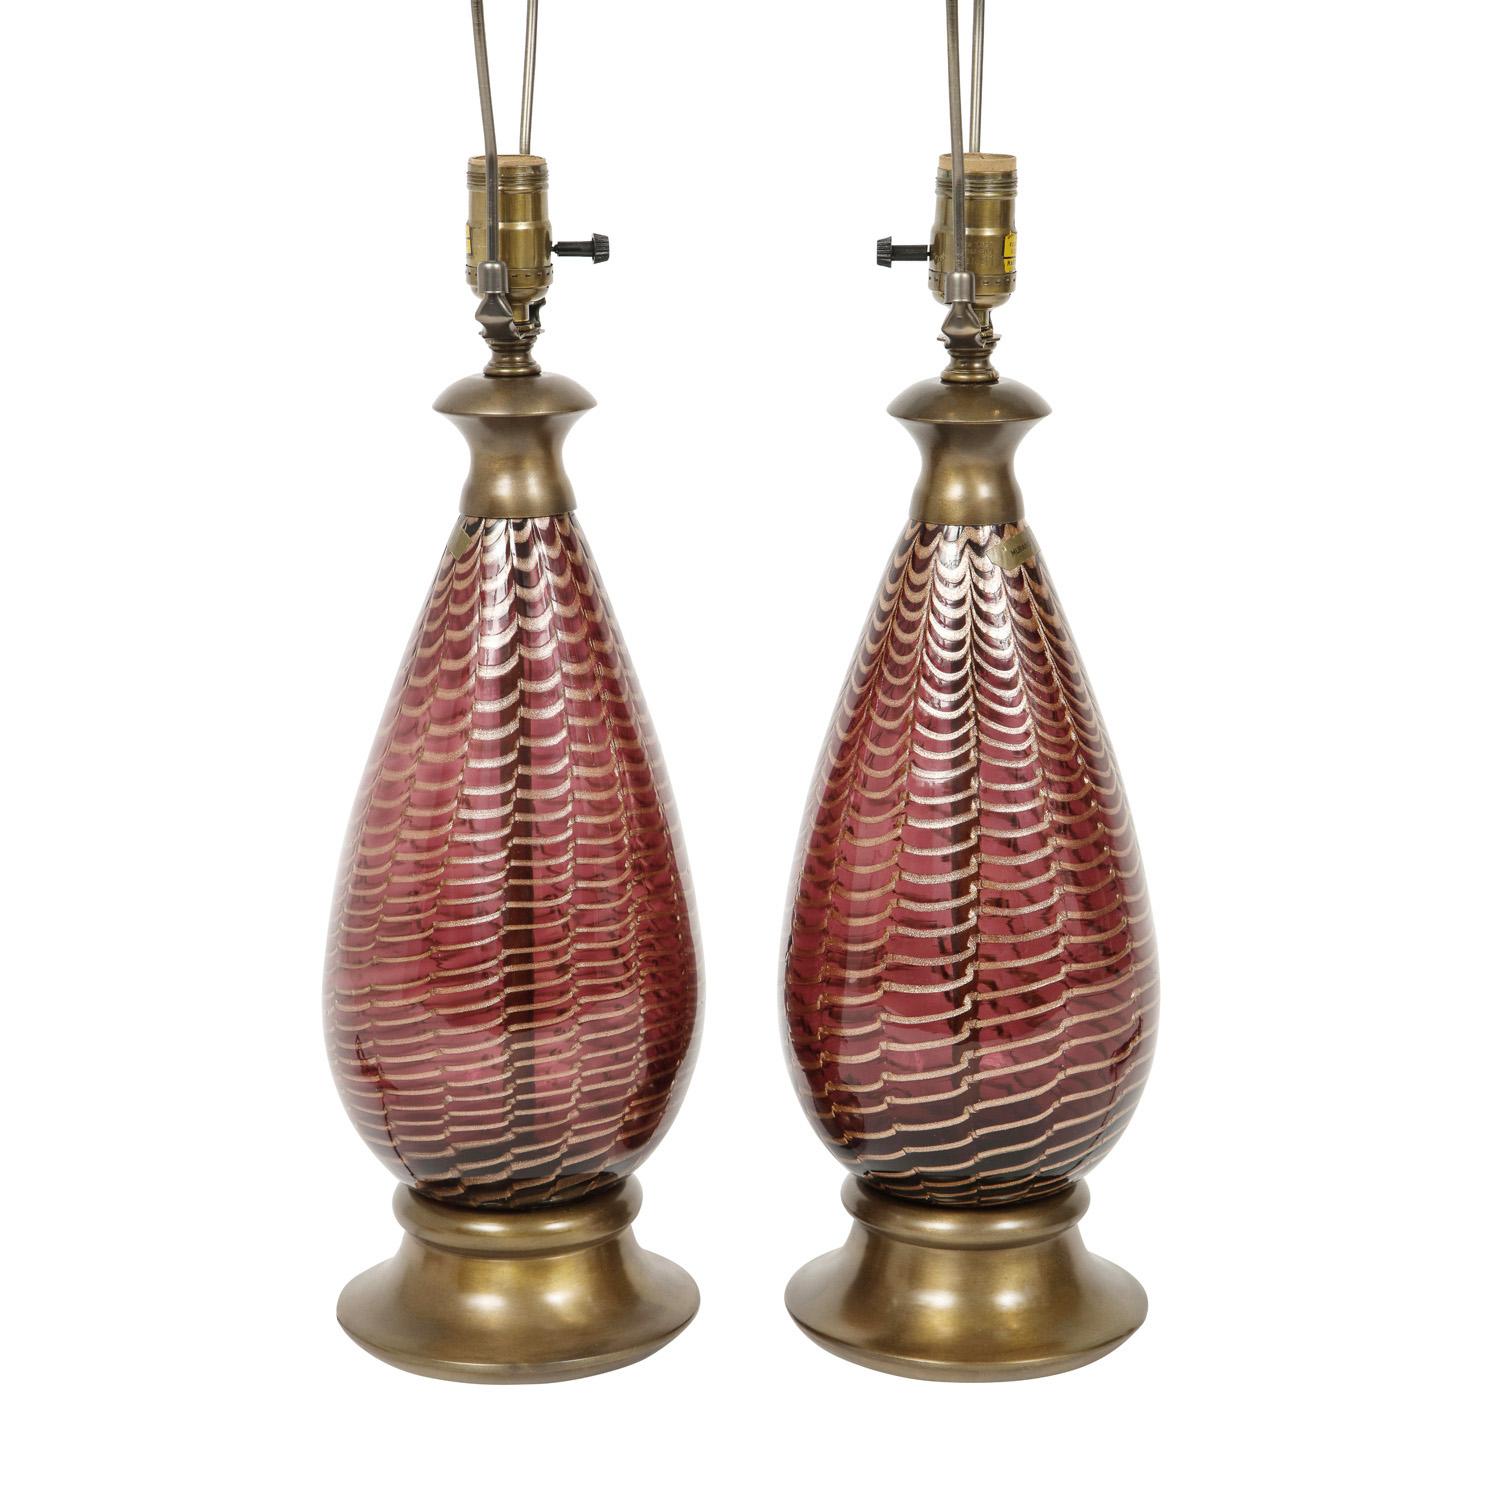 Hand-Crafted Pair of Extraordinary Hand Blown Glass Table Lamps, 1940s